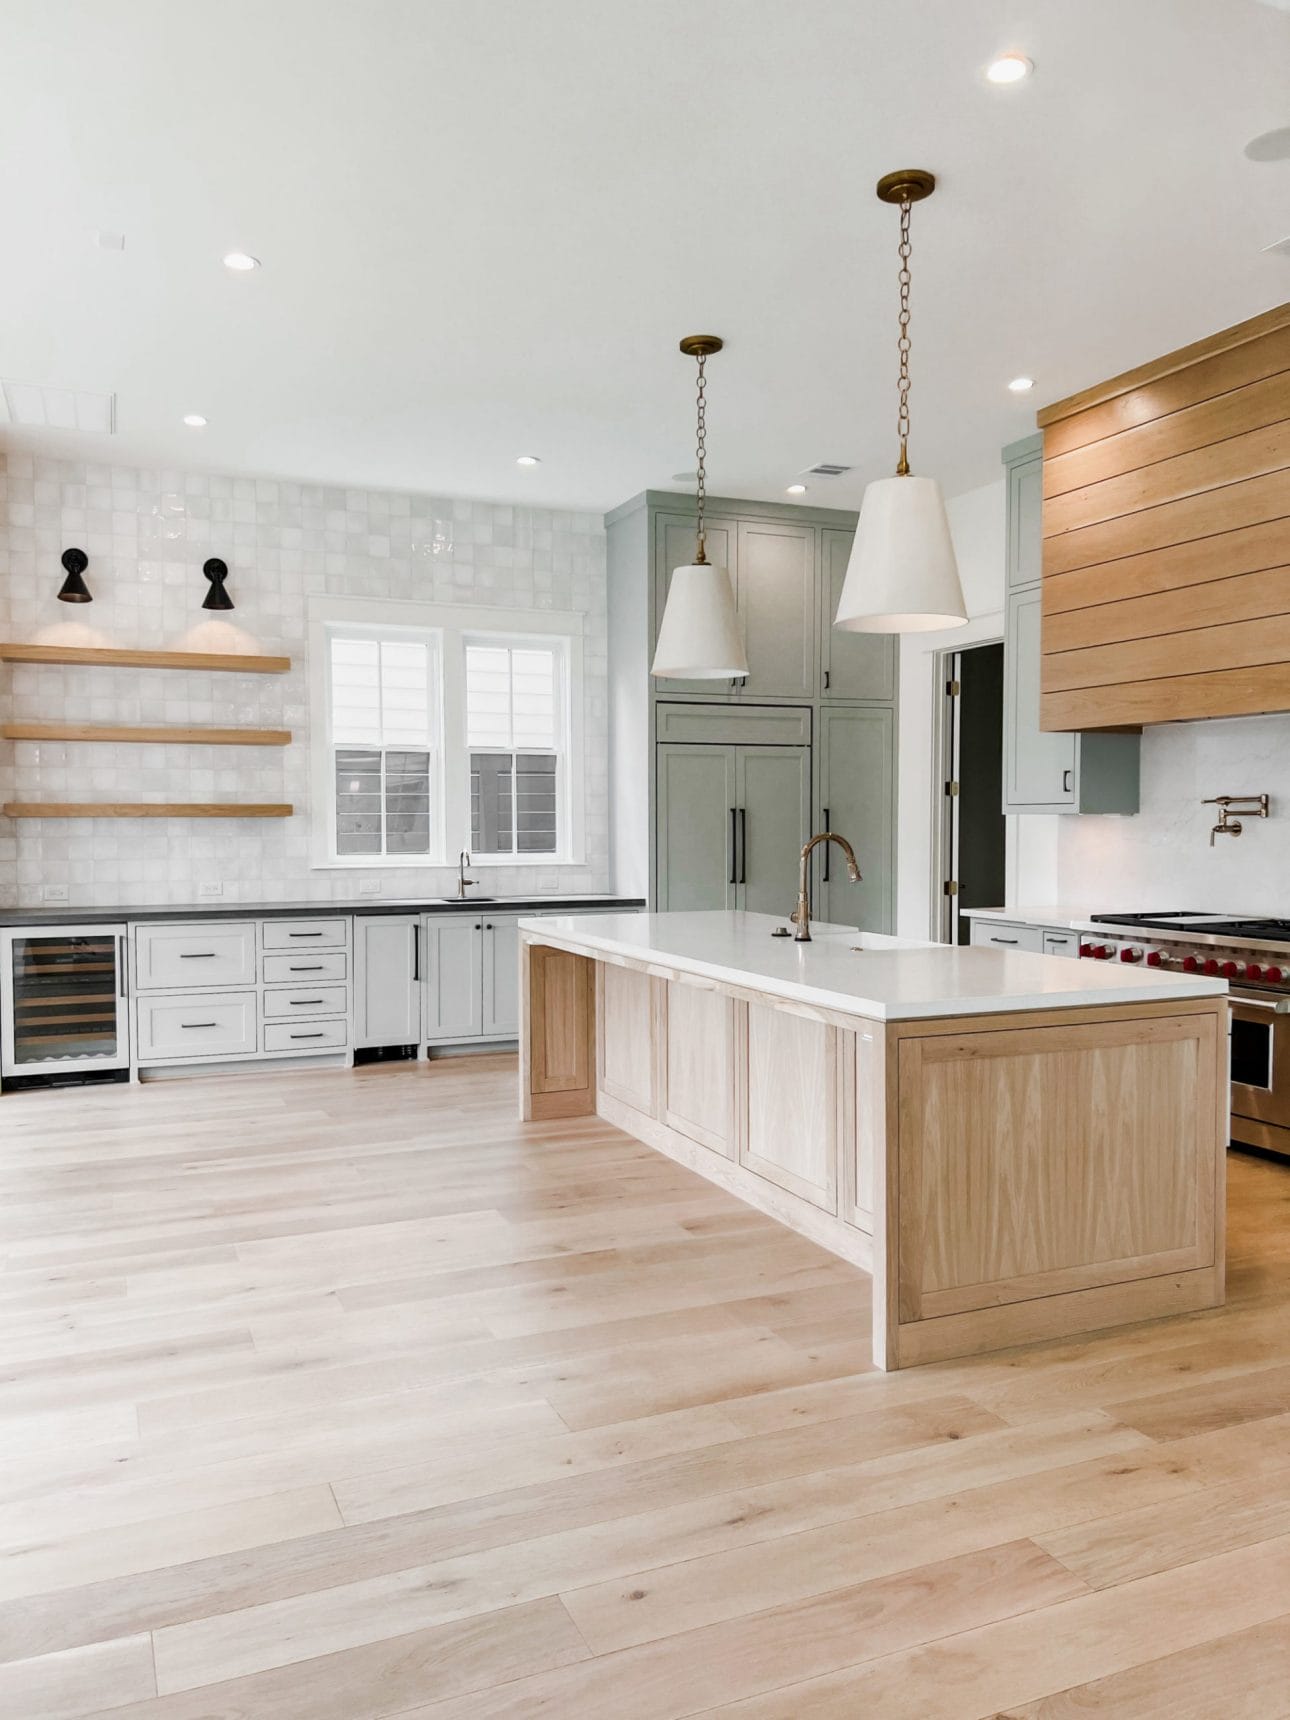 6 Stunning Neutral Colours for Your Kitchen Cabinets - Grey & Avery